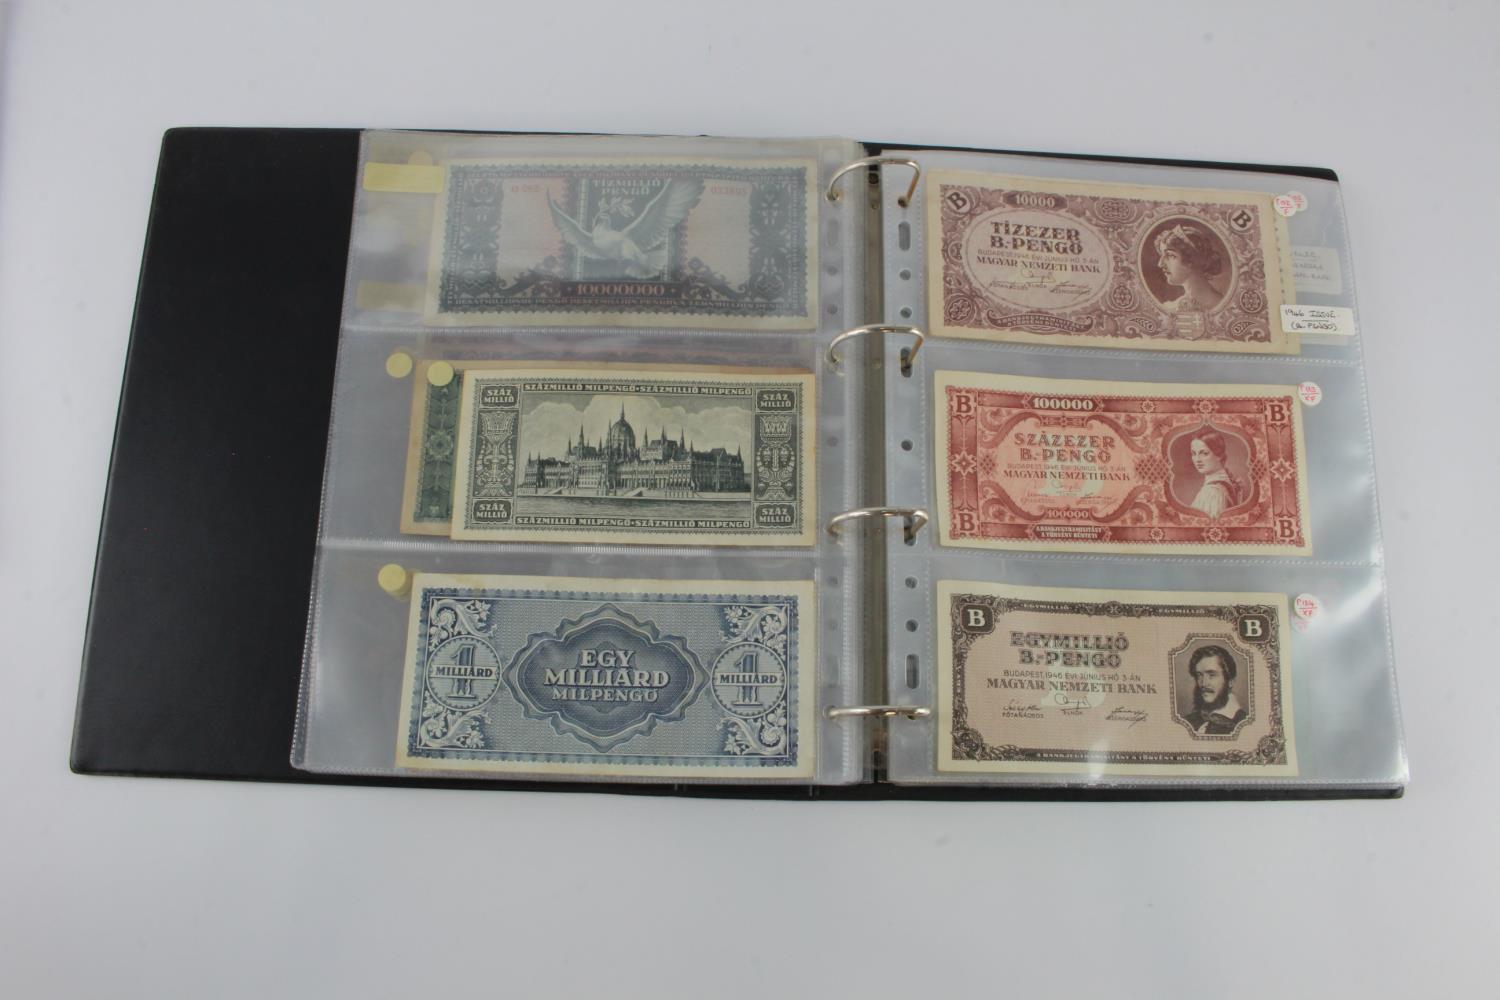 Hungary (52), collection in album, issues from 1840's to 1990's, including a group of B-Pengo - Image 18 of 31